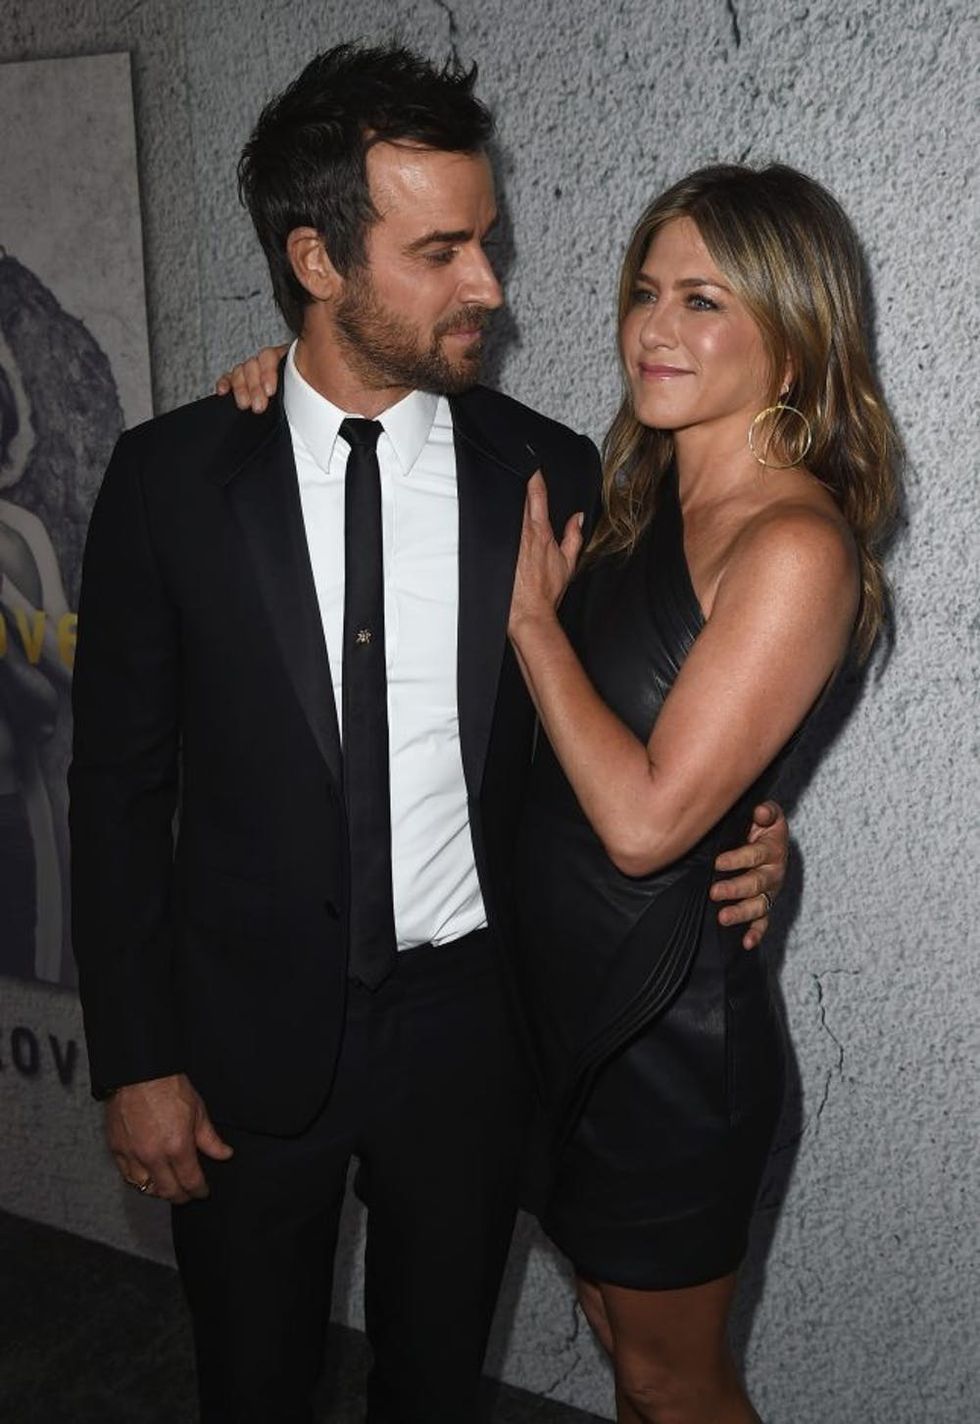 LOS ANGELES, CA - APRIL 04: Actors Justin Theroux and Jennifer Aniston attend the premiere of HBO's 